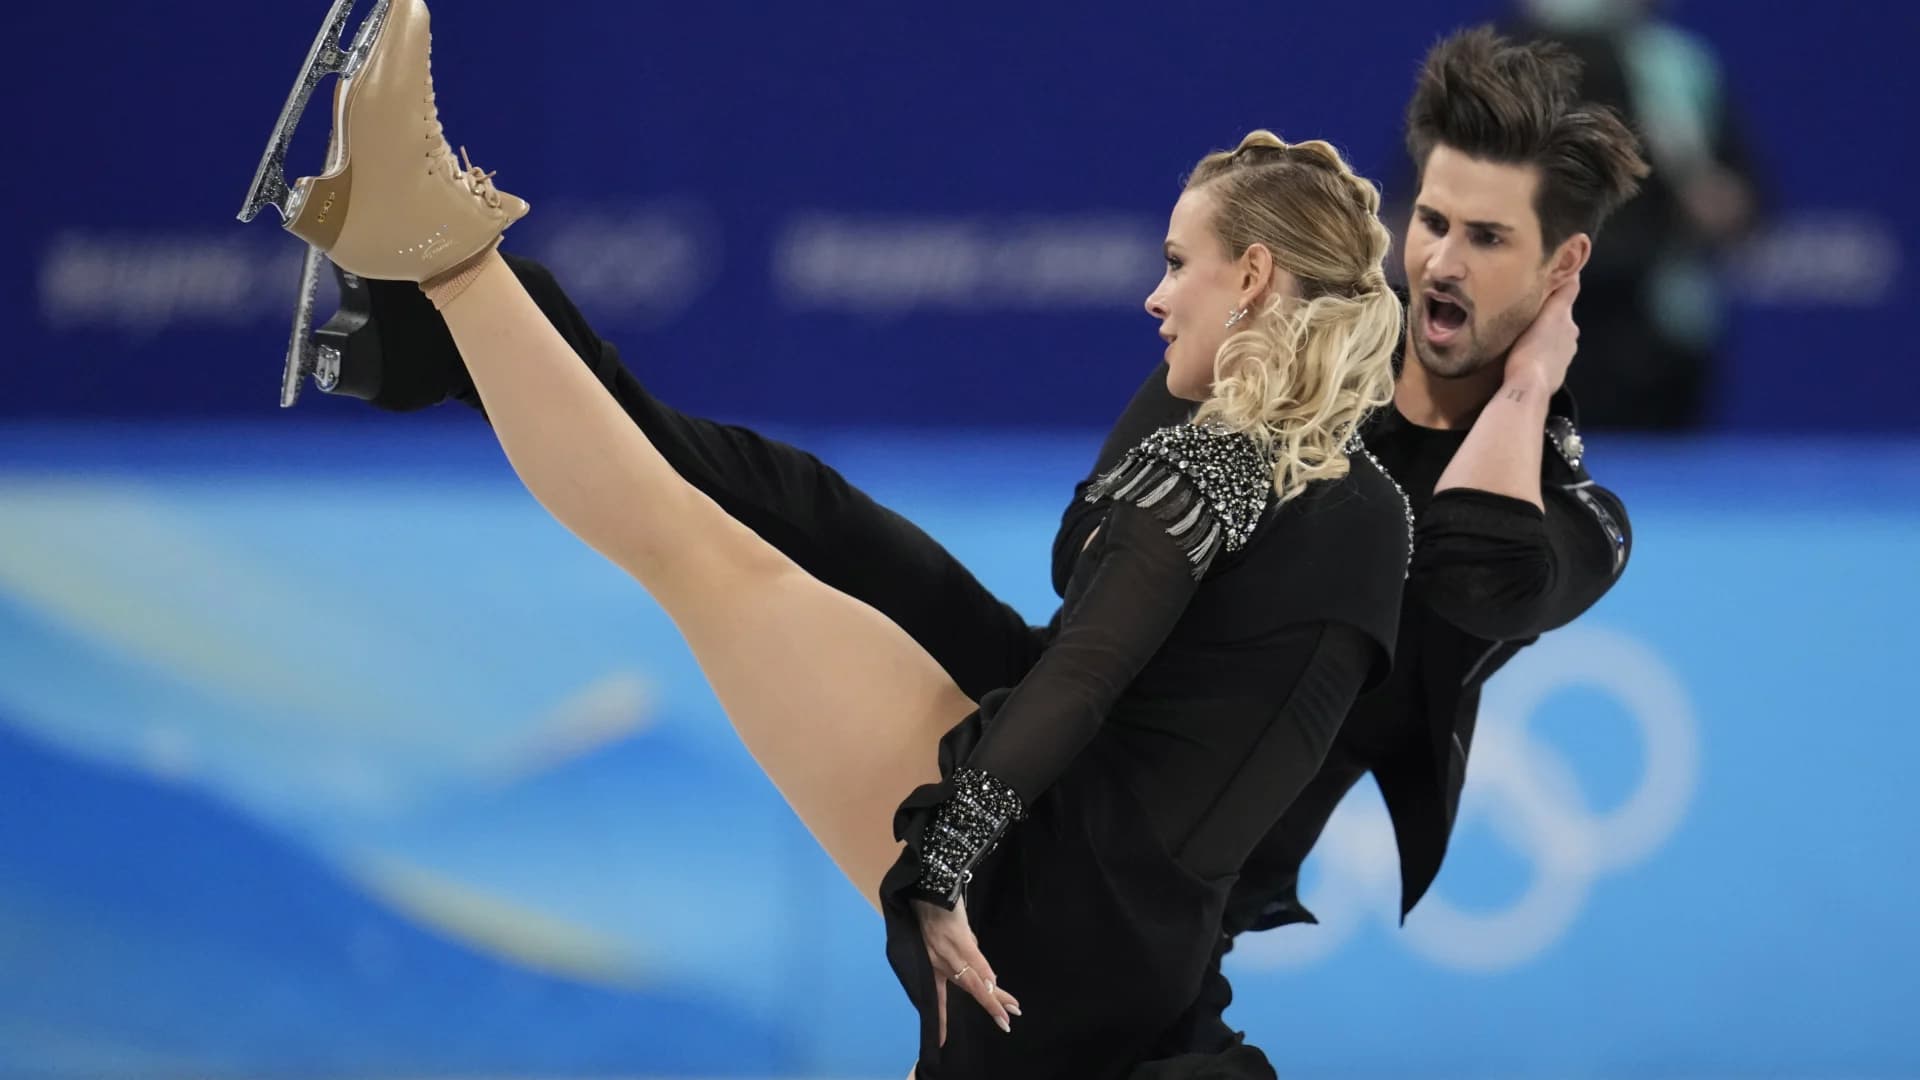 Madison's Zachary Donohue wins bronze in ice dancing